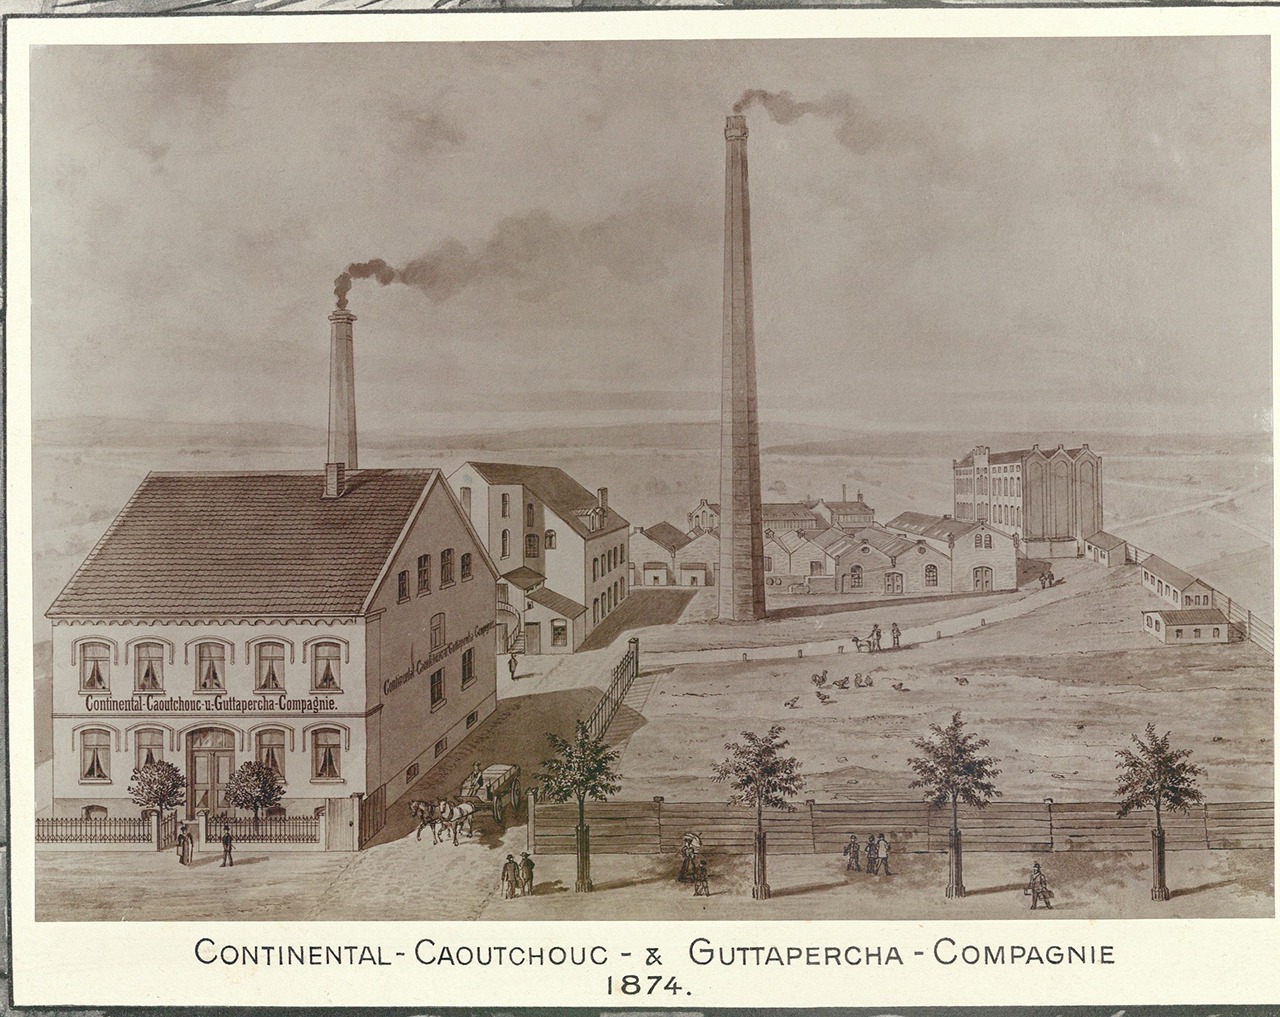 Old poster showing the landscape with a factory